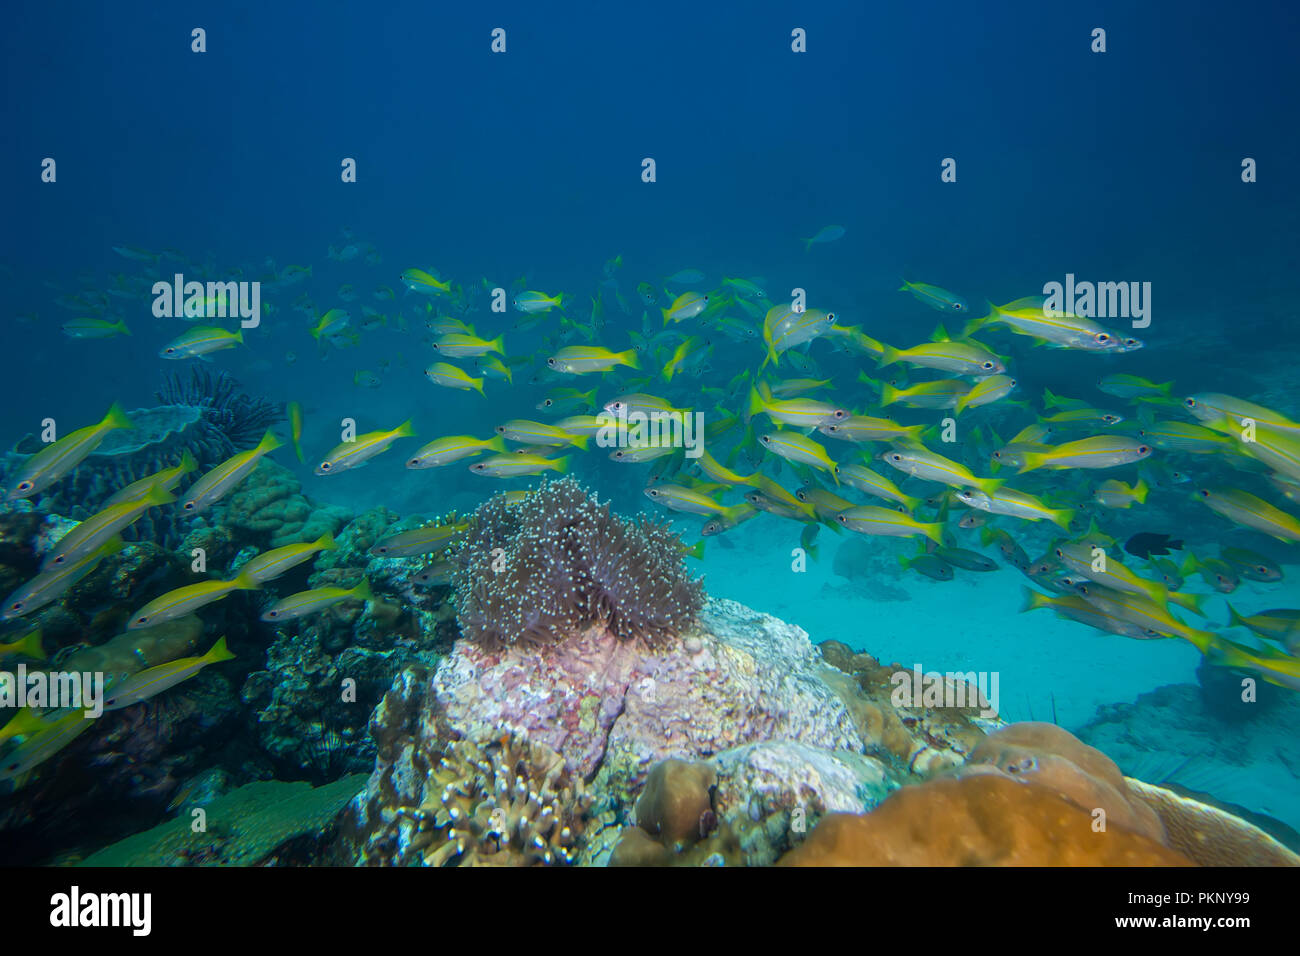 The school of yellow strip fish in the underwater Stock Photo